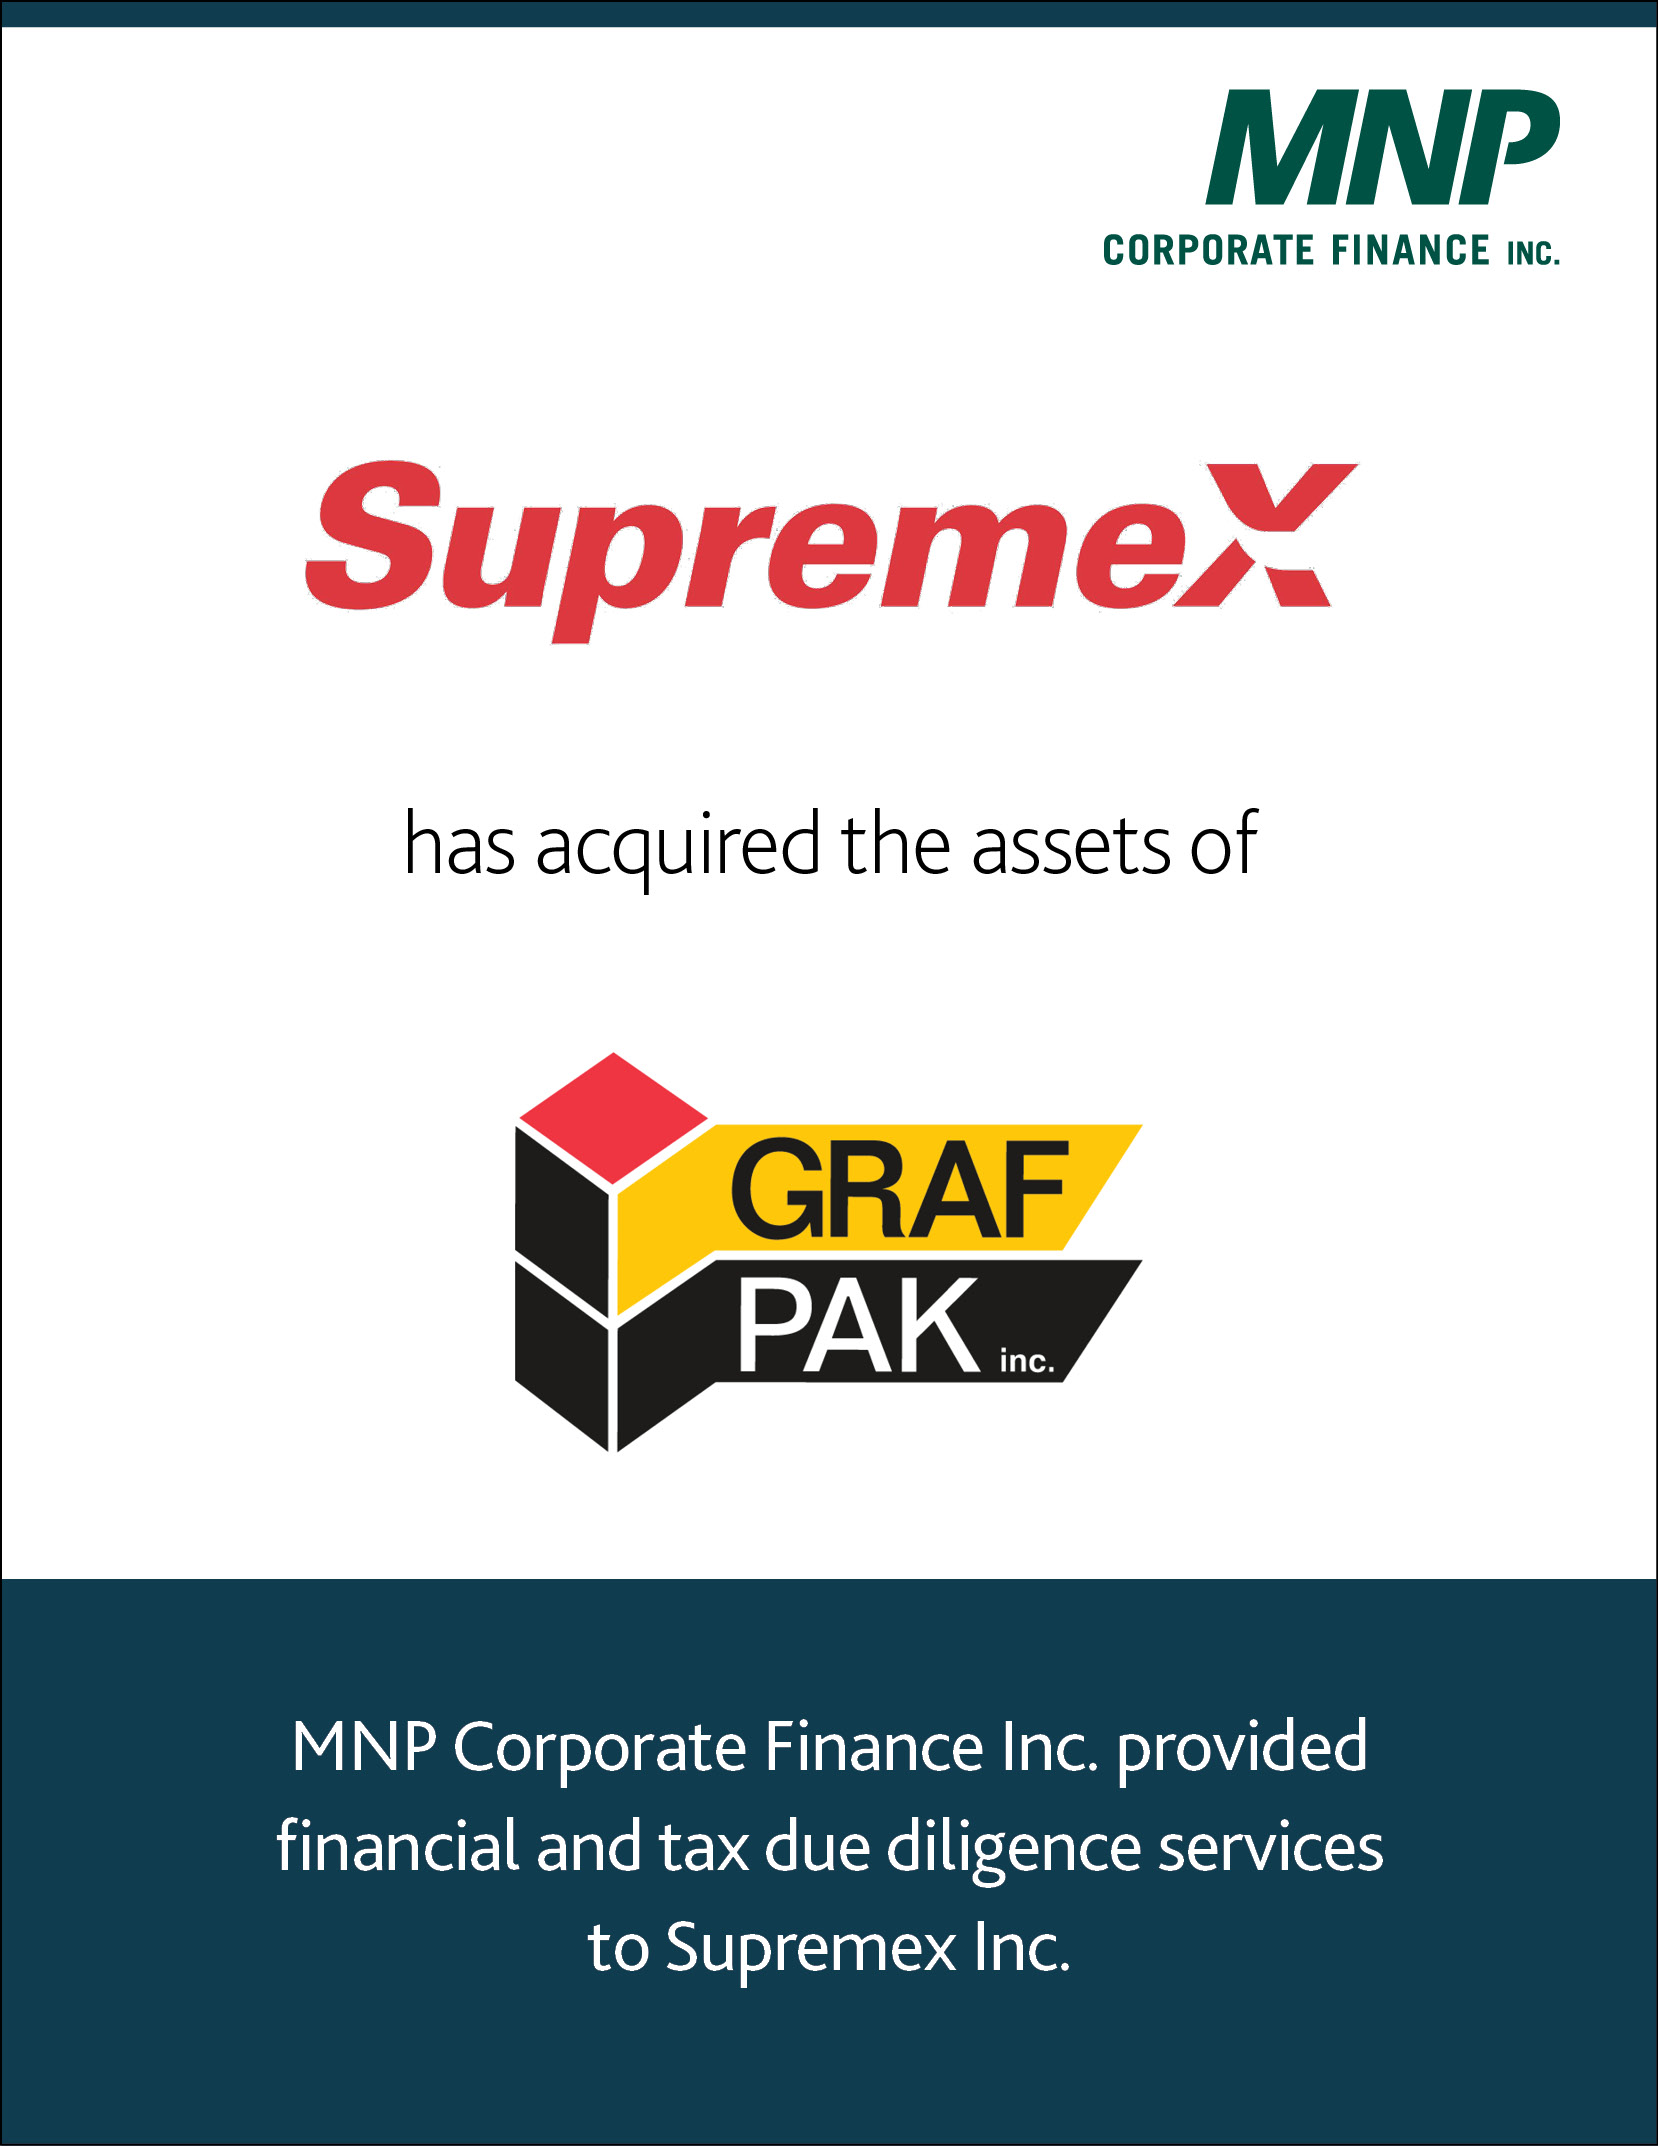 Supreme X has acquired the assets of Graf Pak